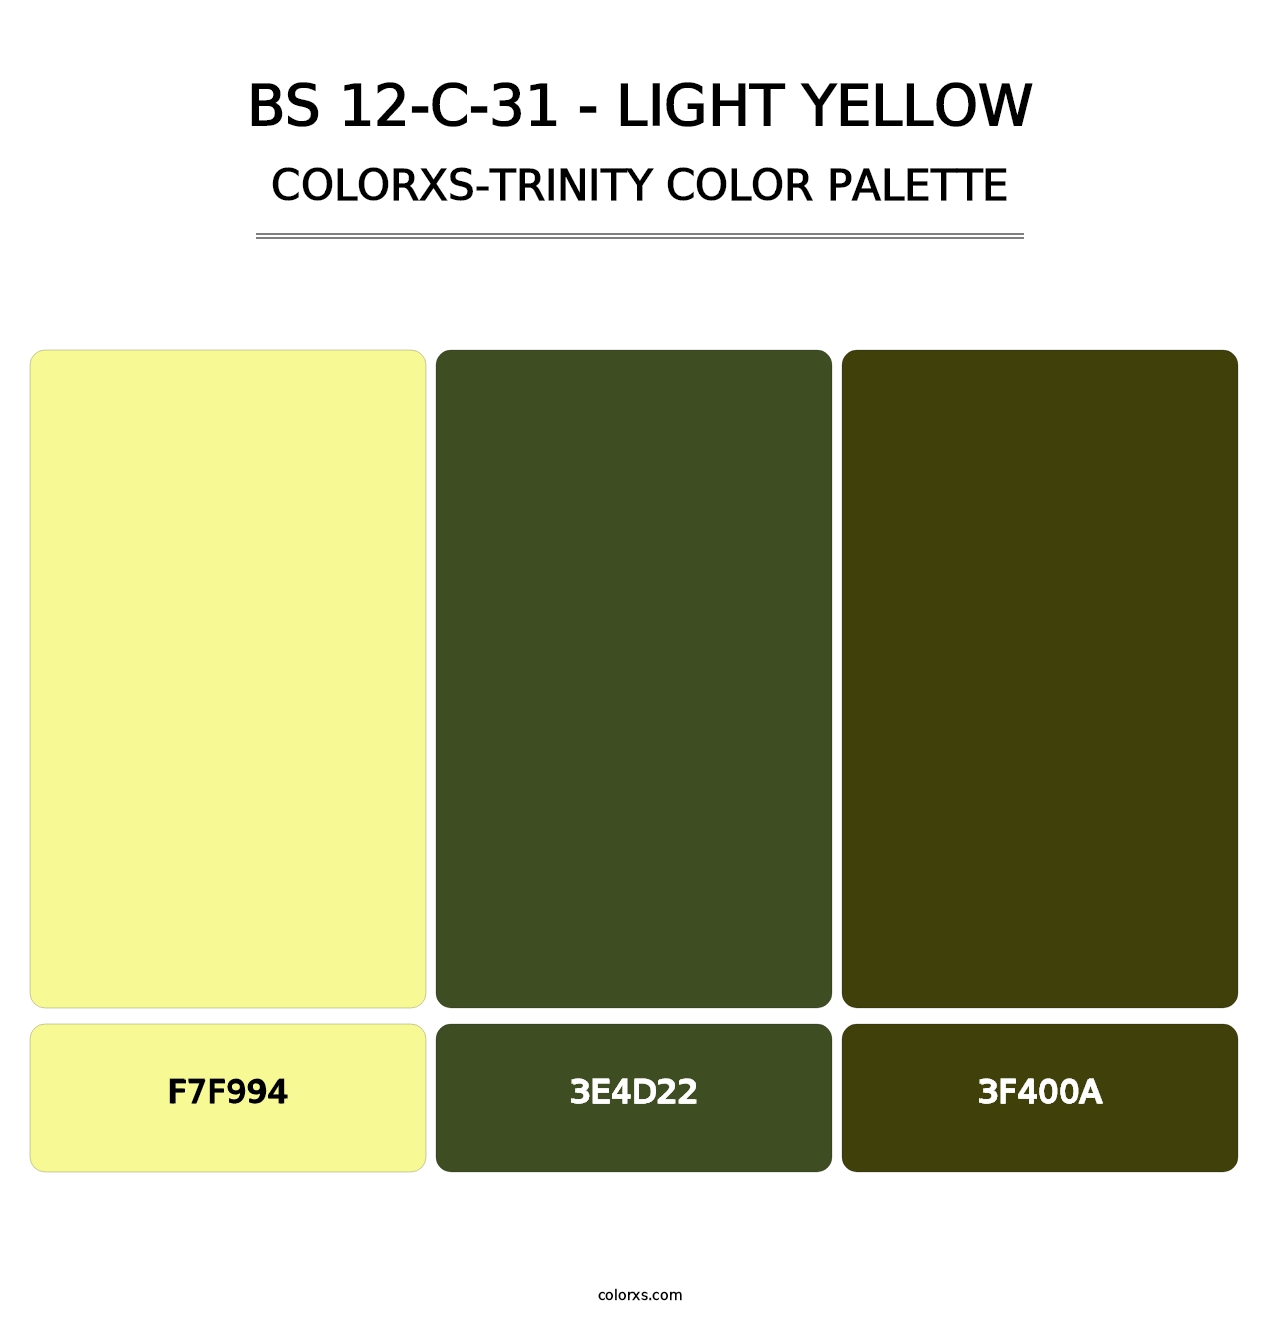 BS 12-C-31 - Light Yellow - Colorxs Trinity Palette